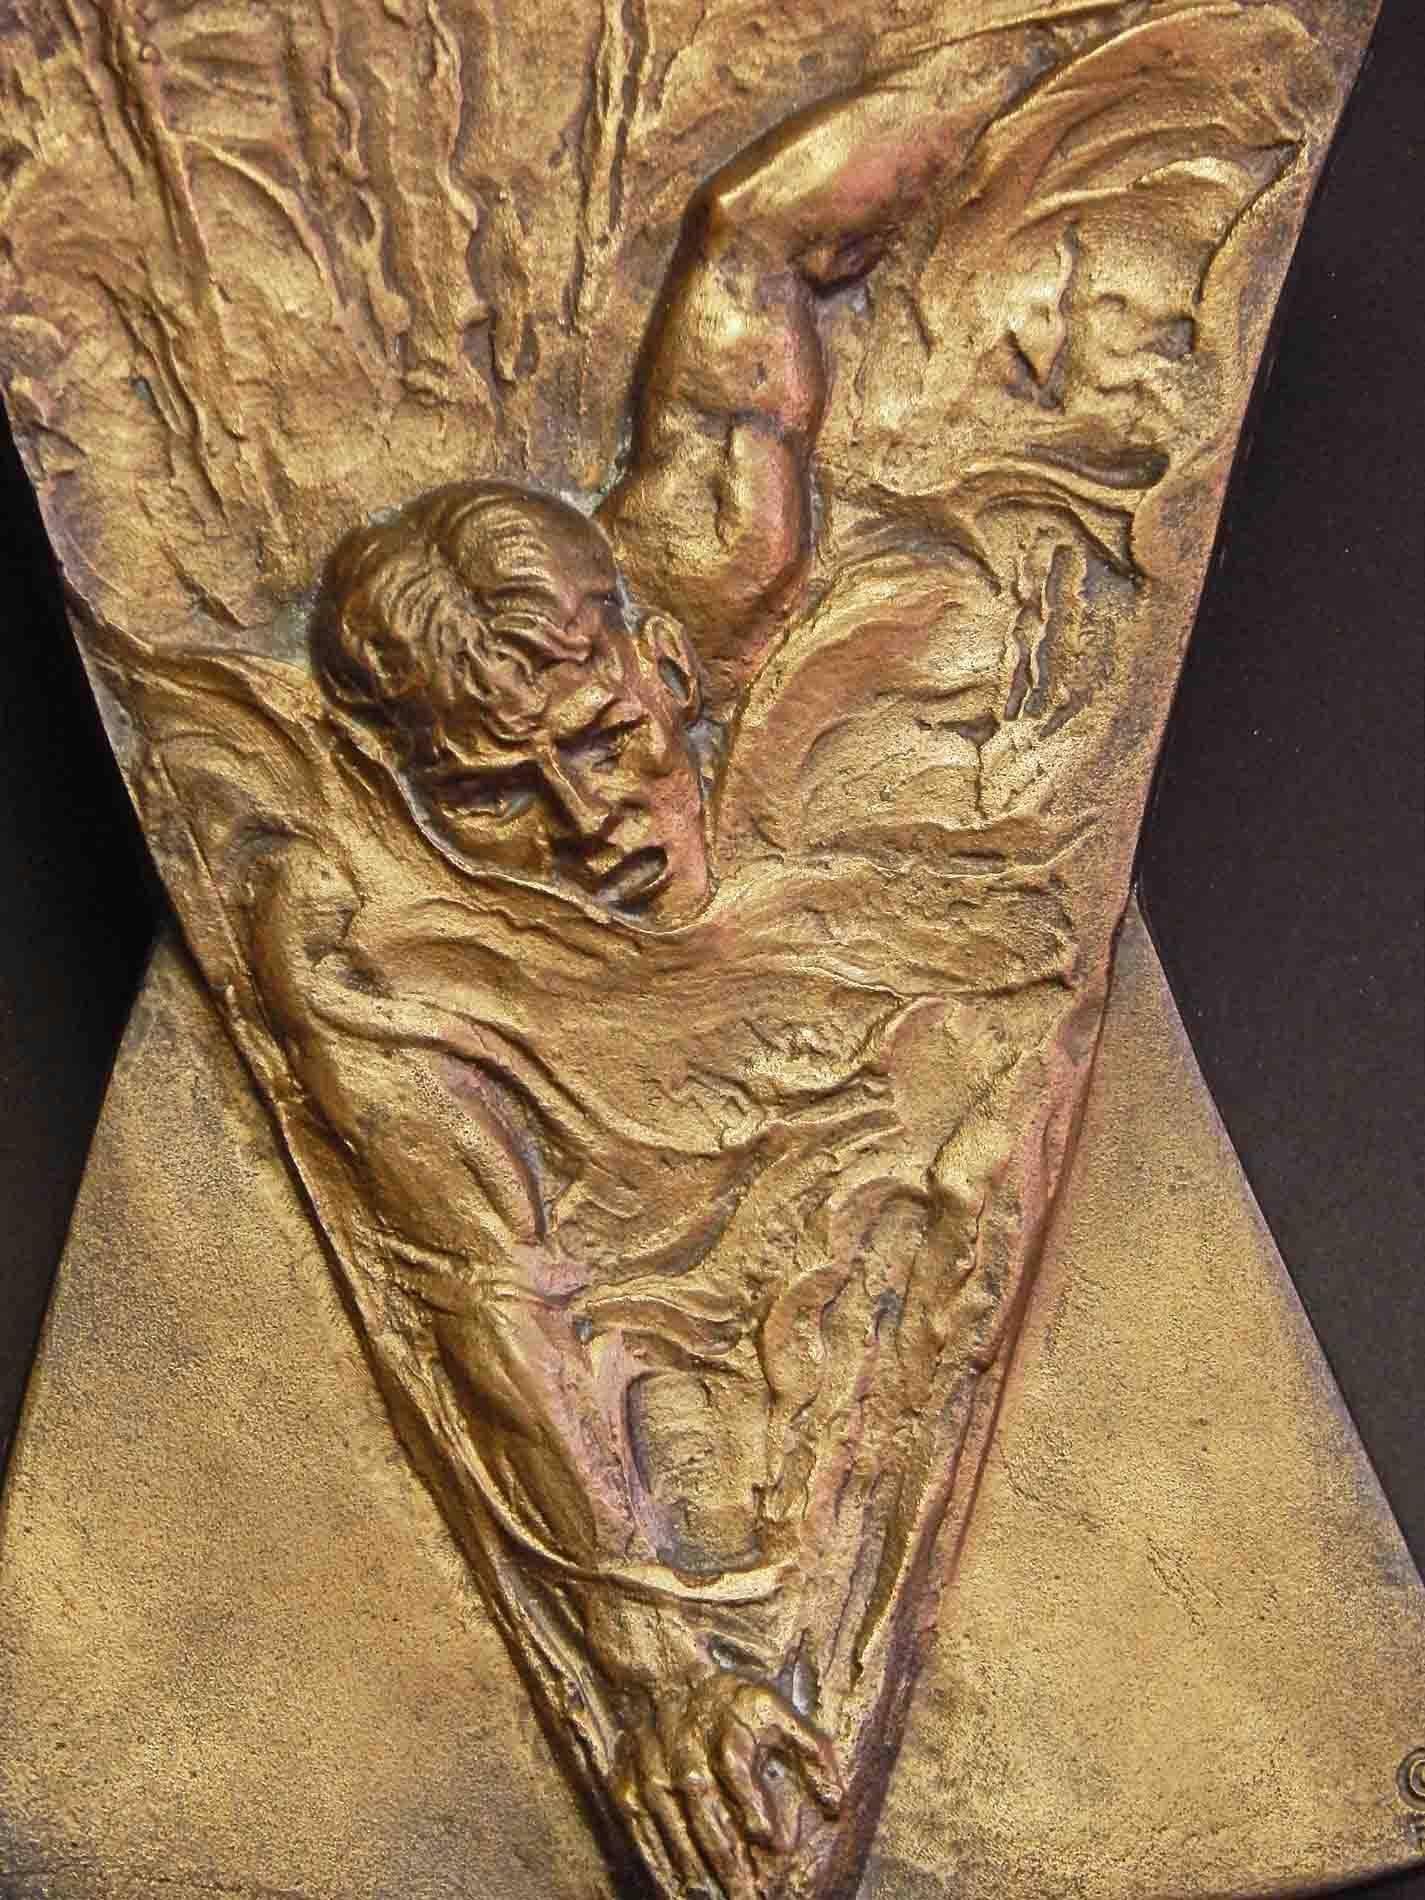 Clearly sculpted and cast as the prototype for a bronze awards plaque celebrating accomplishment in the freestyle or front crawl stroke, this piece shows the athlete at the peak of power, his body causing the surrounding water to froth and foam